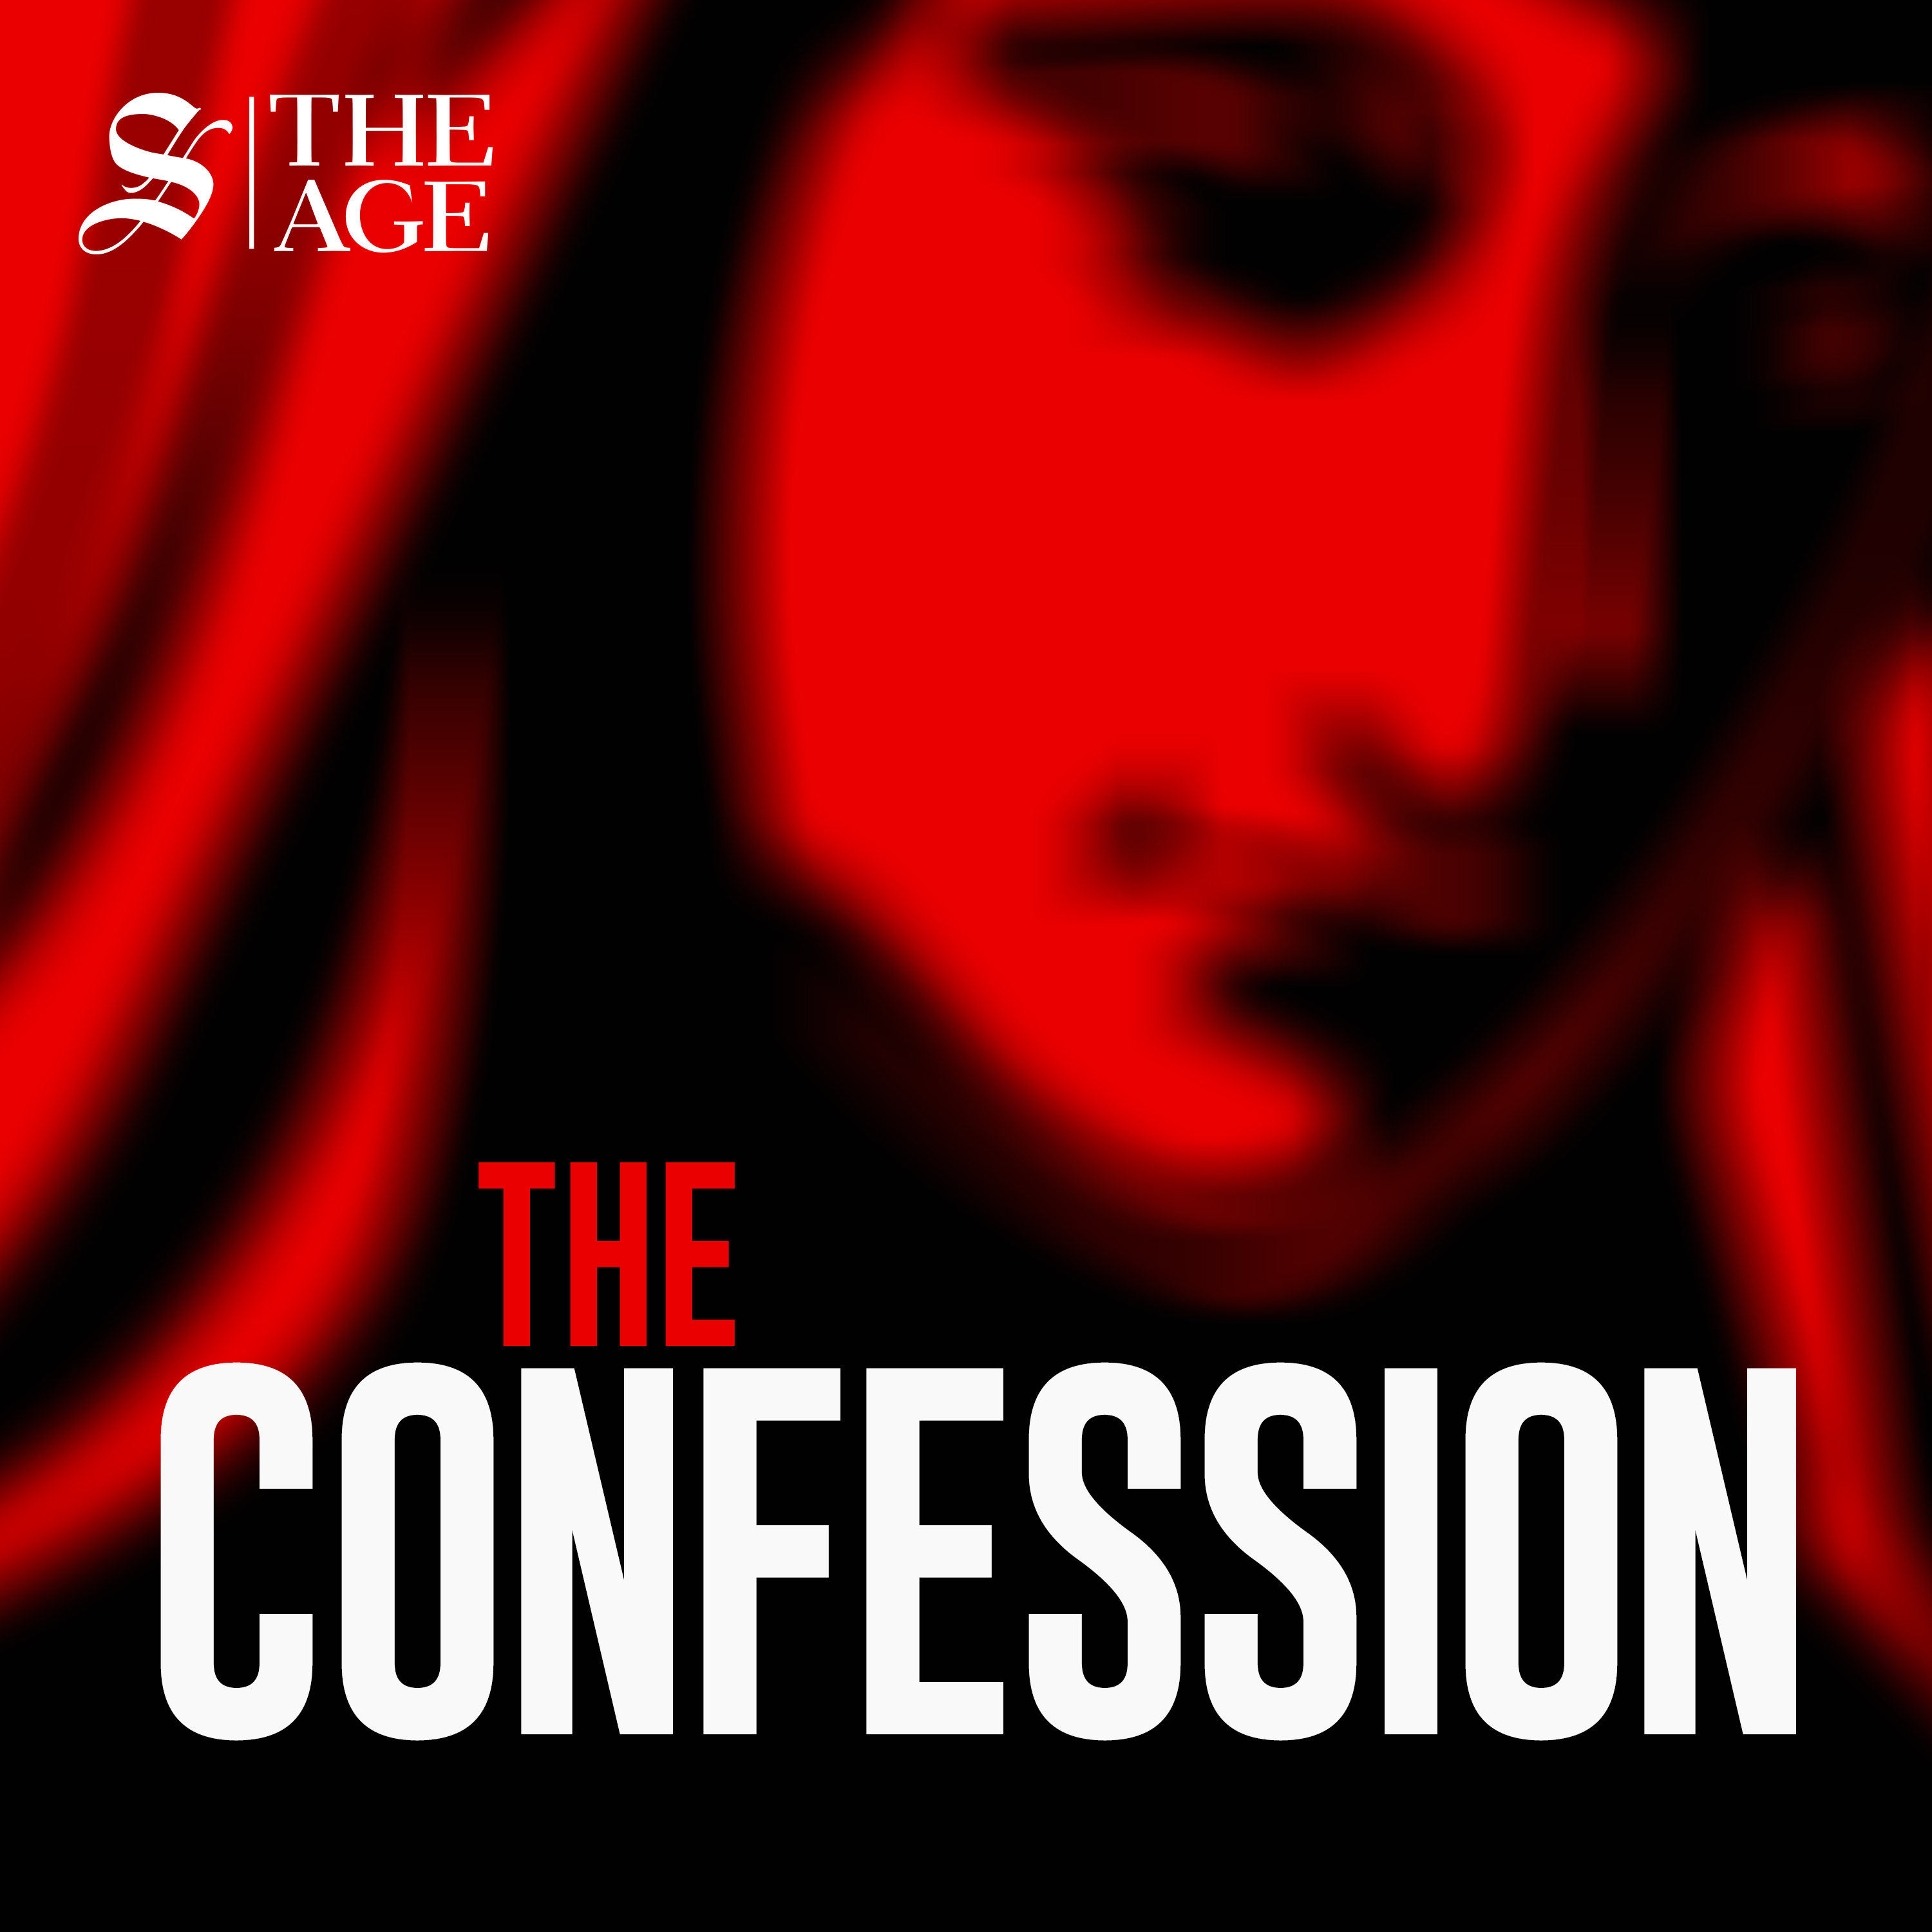 Coming soon: The Confession